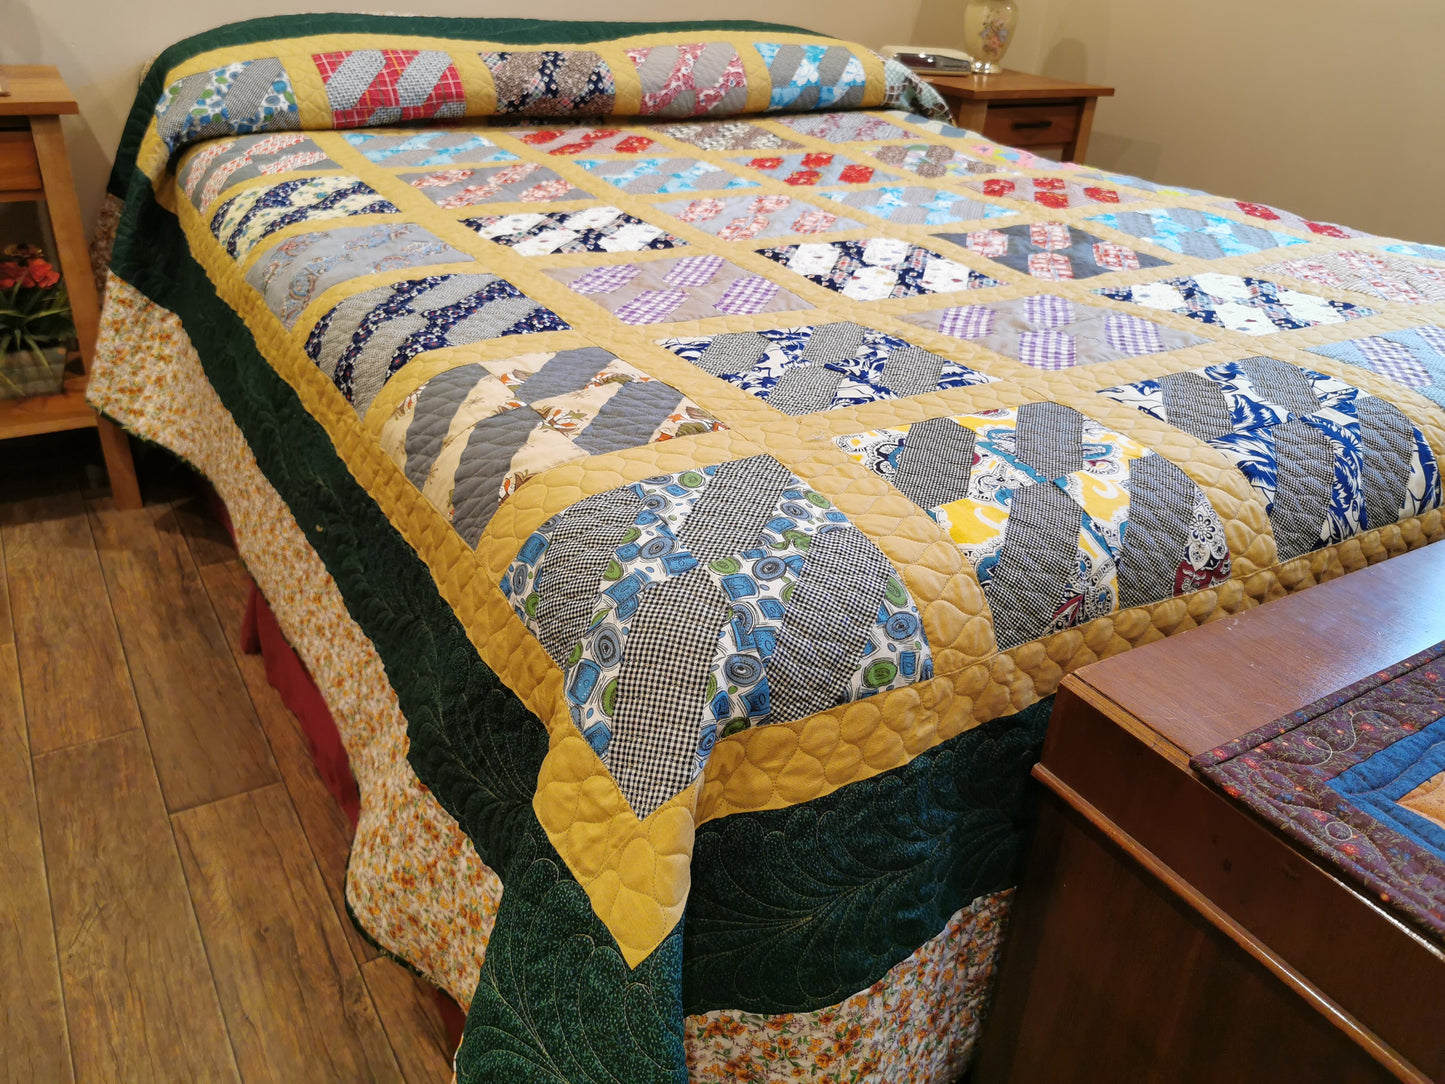 This large queen vintage bed quilt it shown on a queen bed. This view shows along the bedside and how the quitl drapes most of the way to the floor, and it tucked up and over the pillows. The middle (top of the bed)  quilt top has the scrappy vintage patchwork blocks set in a mustard yellow grid pattern. This grid of scrappy blocks is surrounded by a dark green border then a beige floral border around the outside